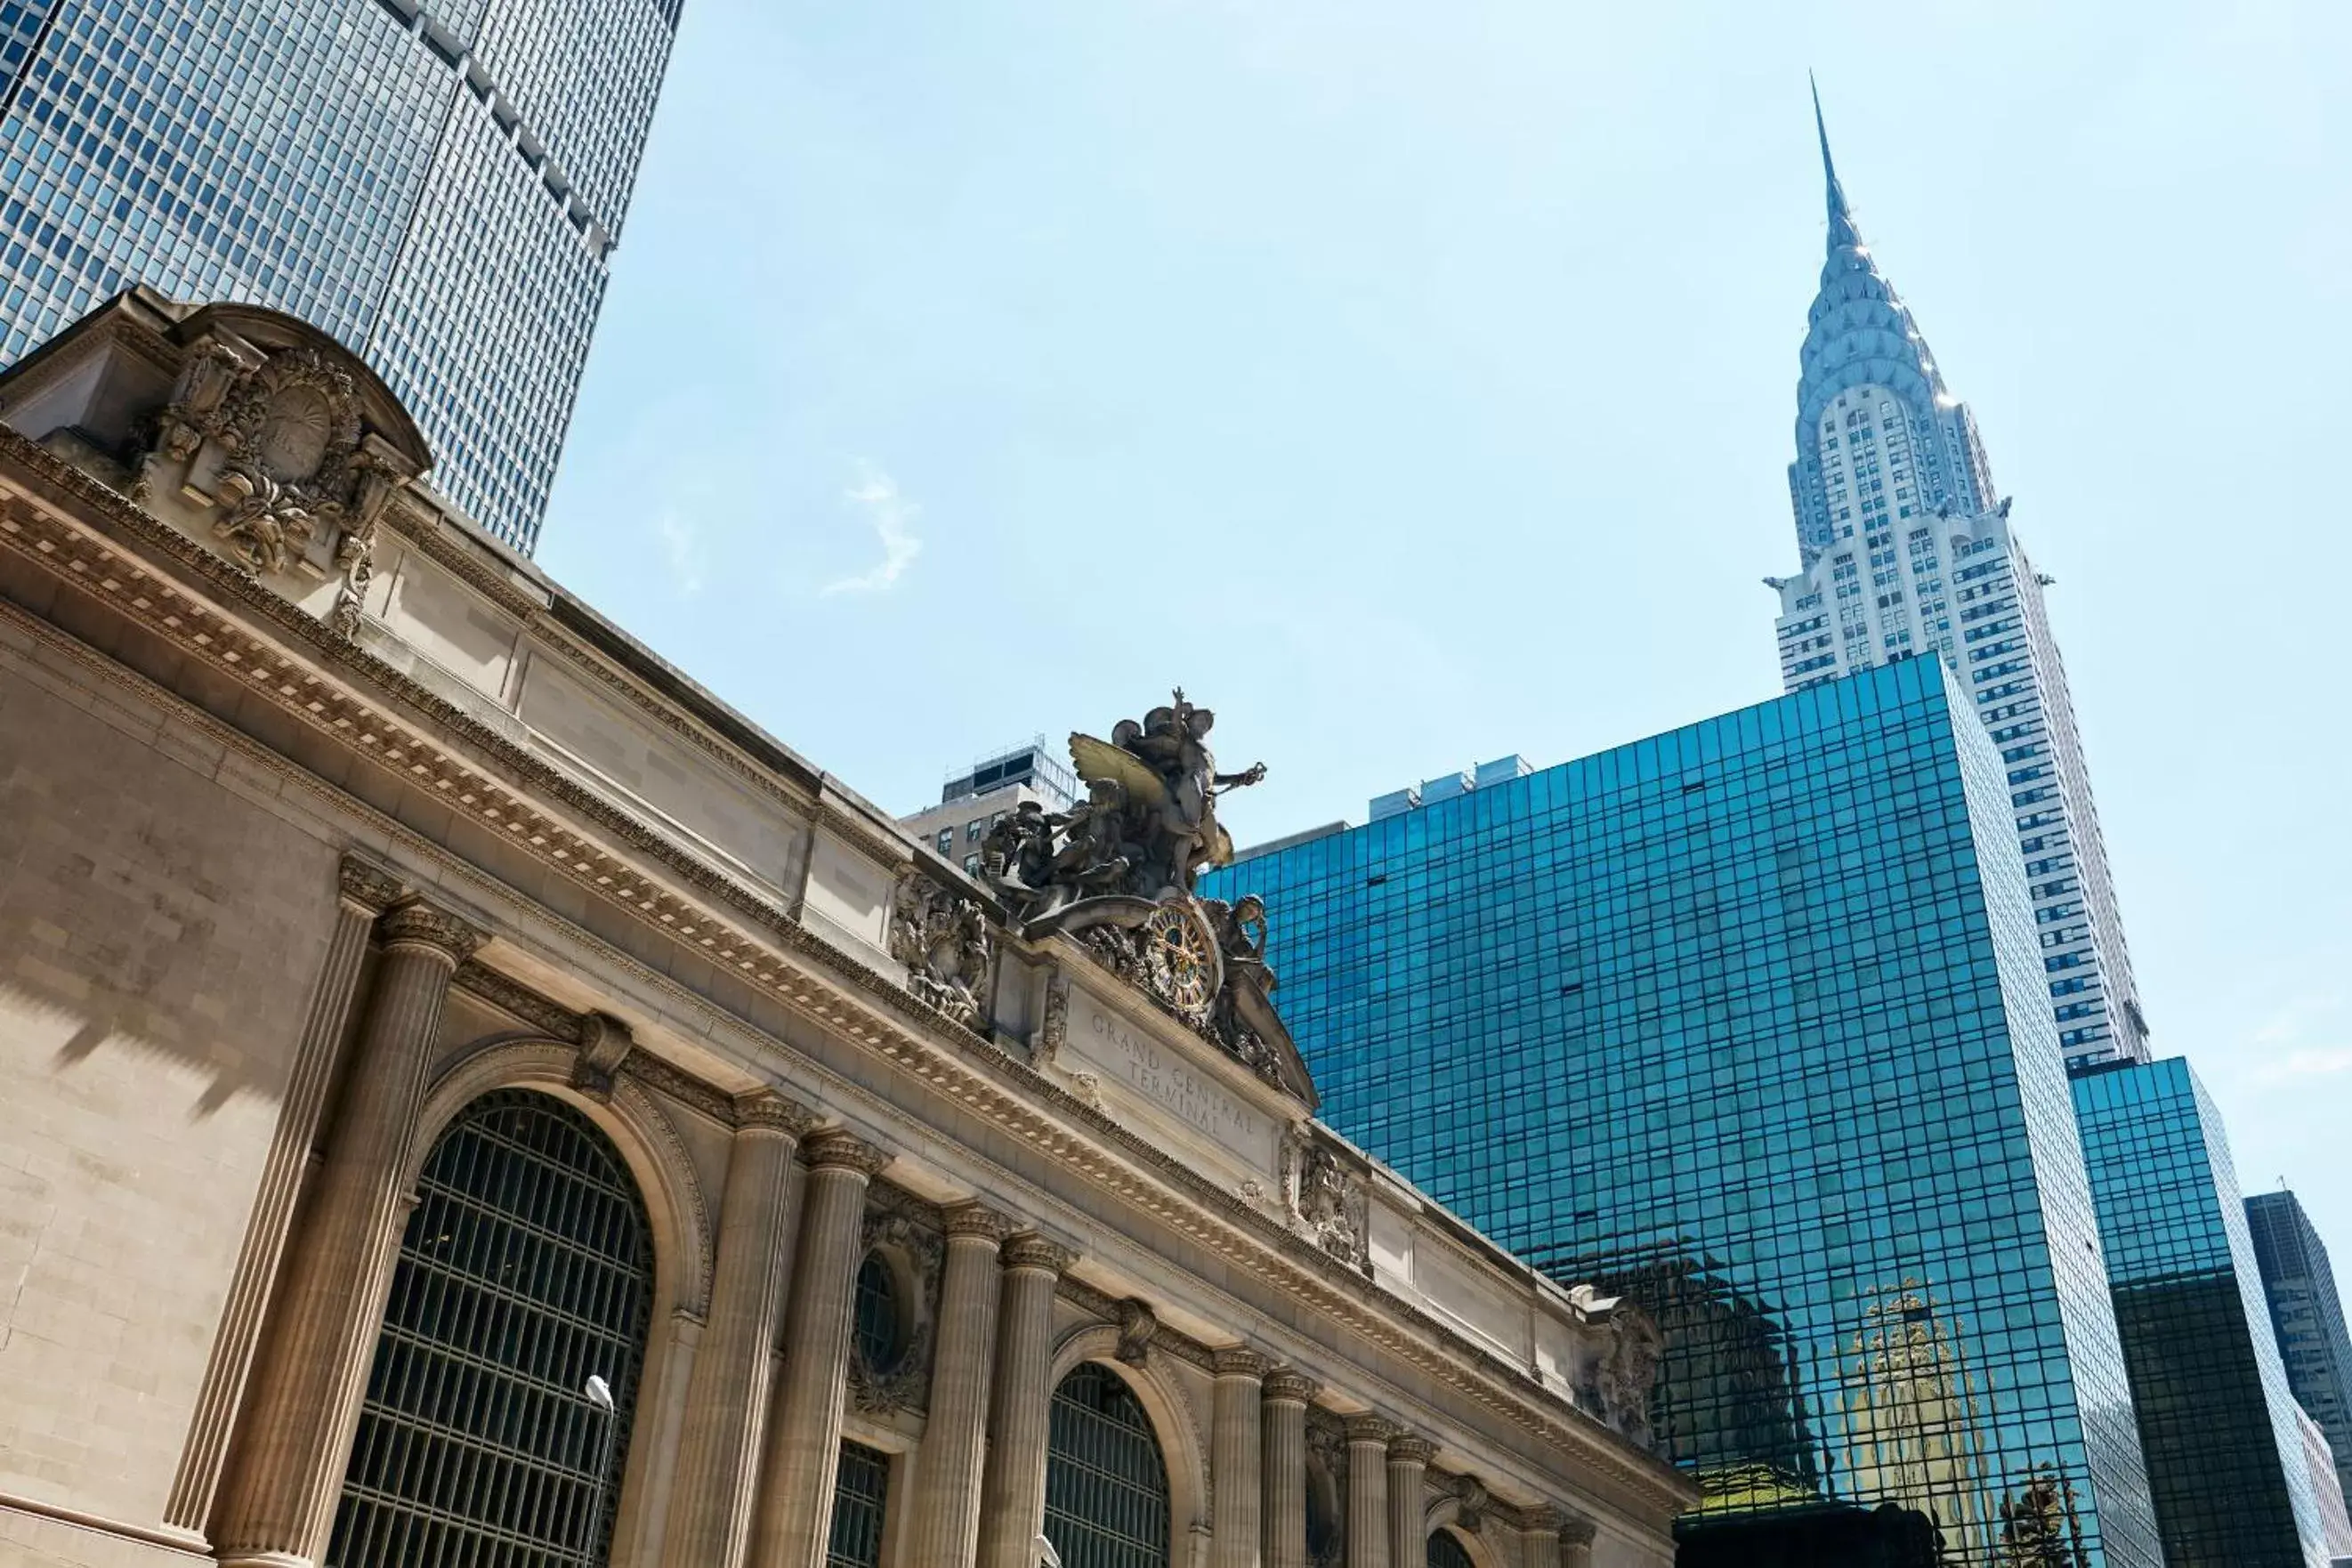 Nearby landmark, Property Building in Hotel Boutique at Grand Central